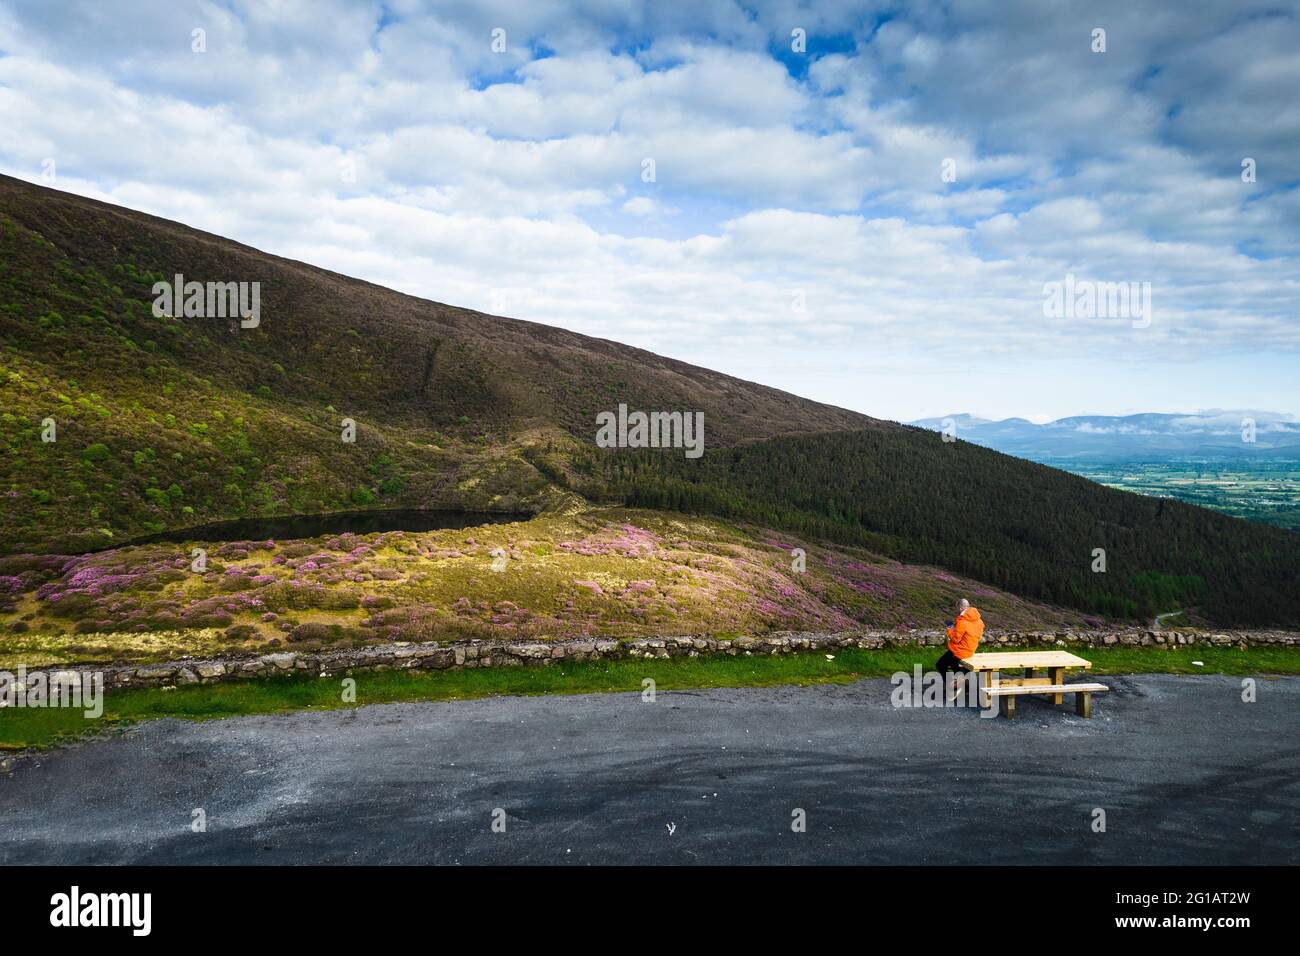 A man sits on a bench admiring the view near Bay Lough lake in Clogheen, county Tipperary in Ireland Stock Photo